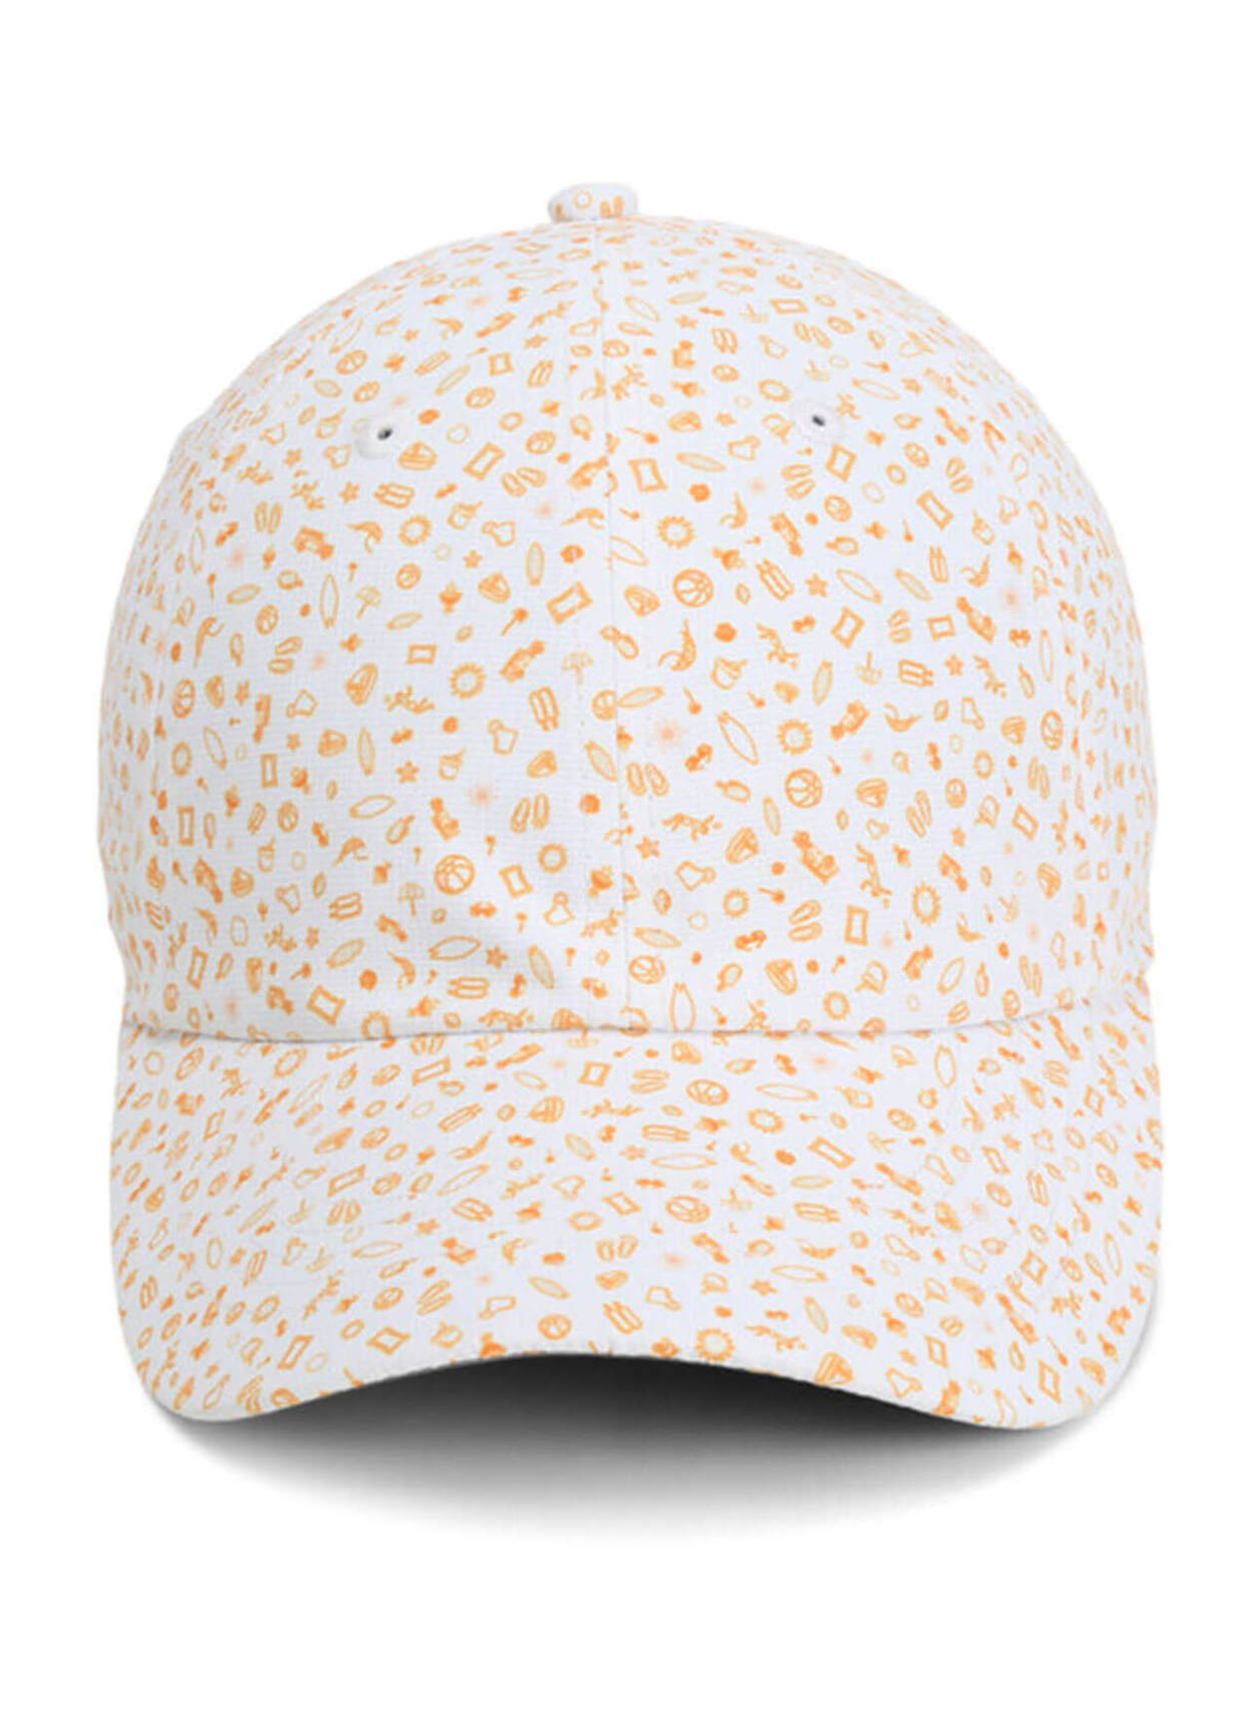 Imperial White / Beach Orange The Alter Ego Pattered Performance Hat